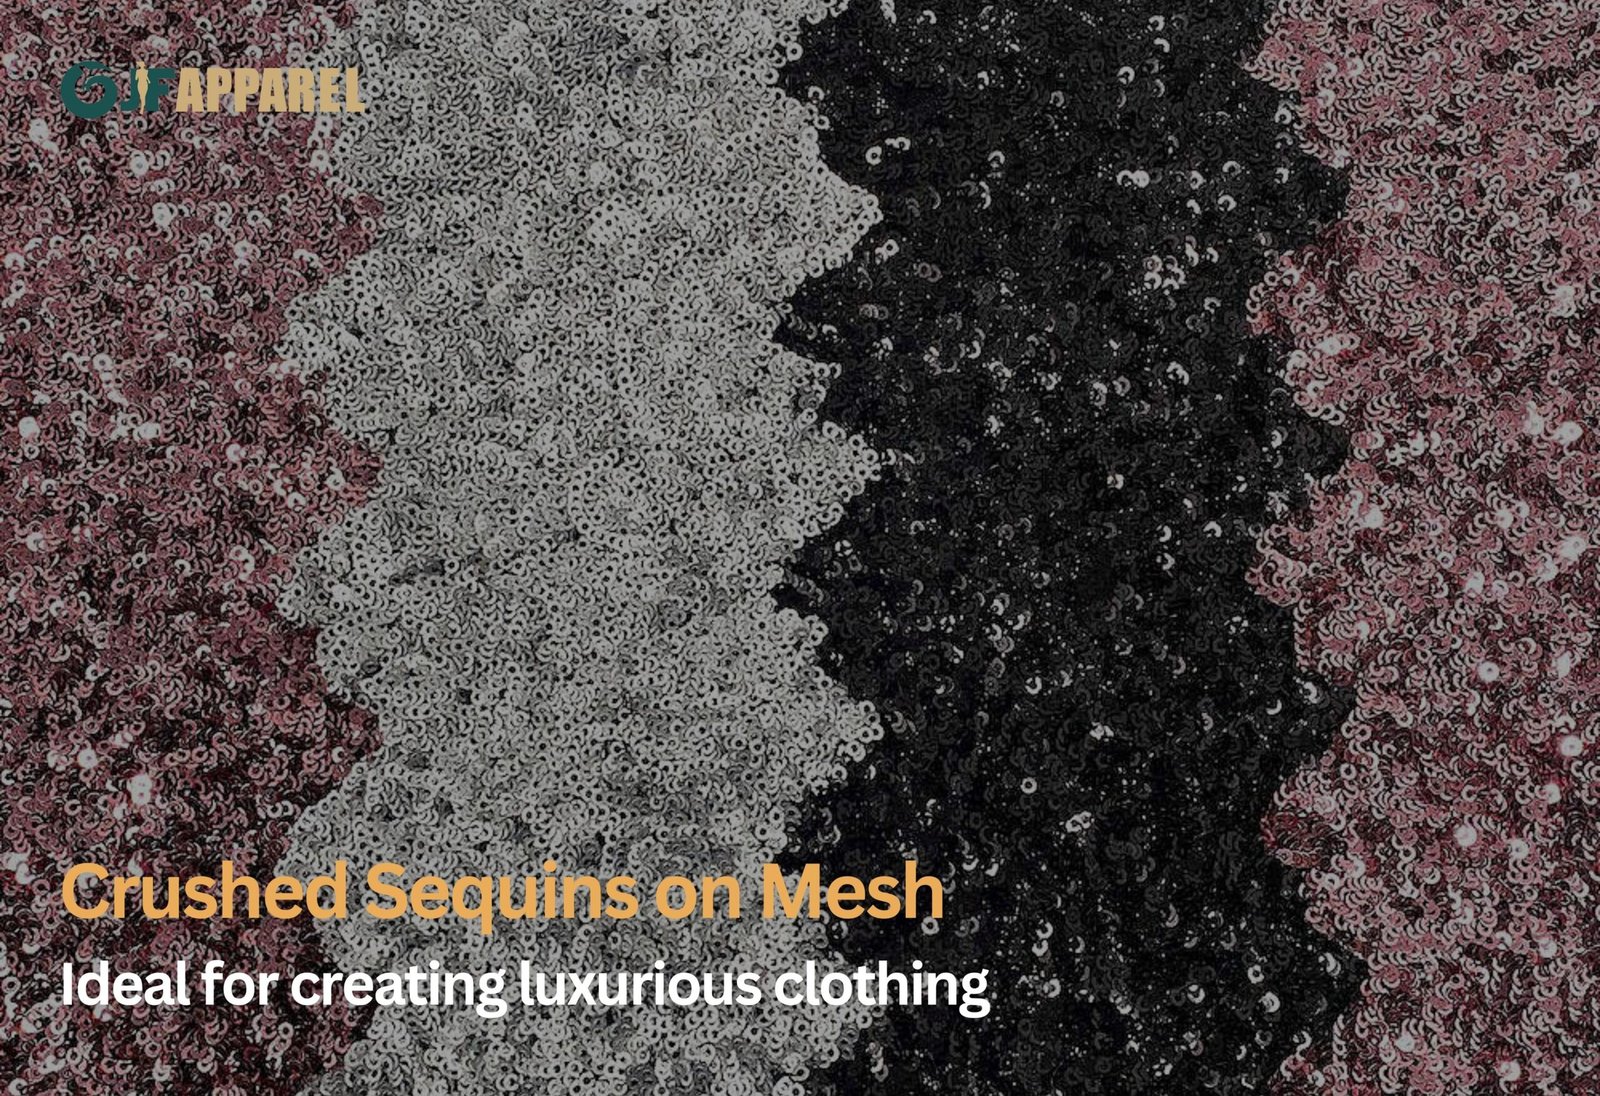 Crushed Sequins on Mesh